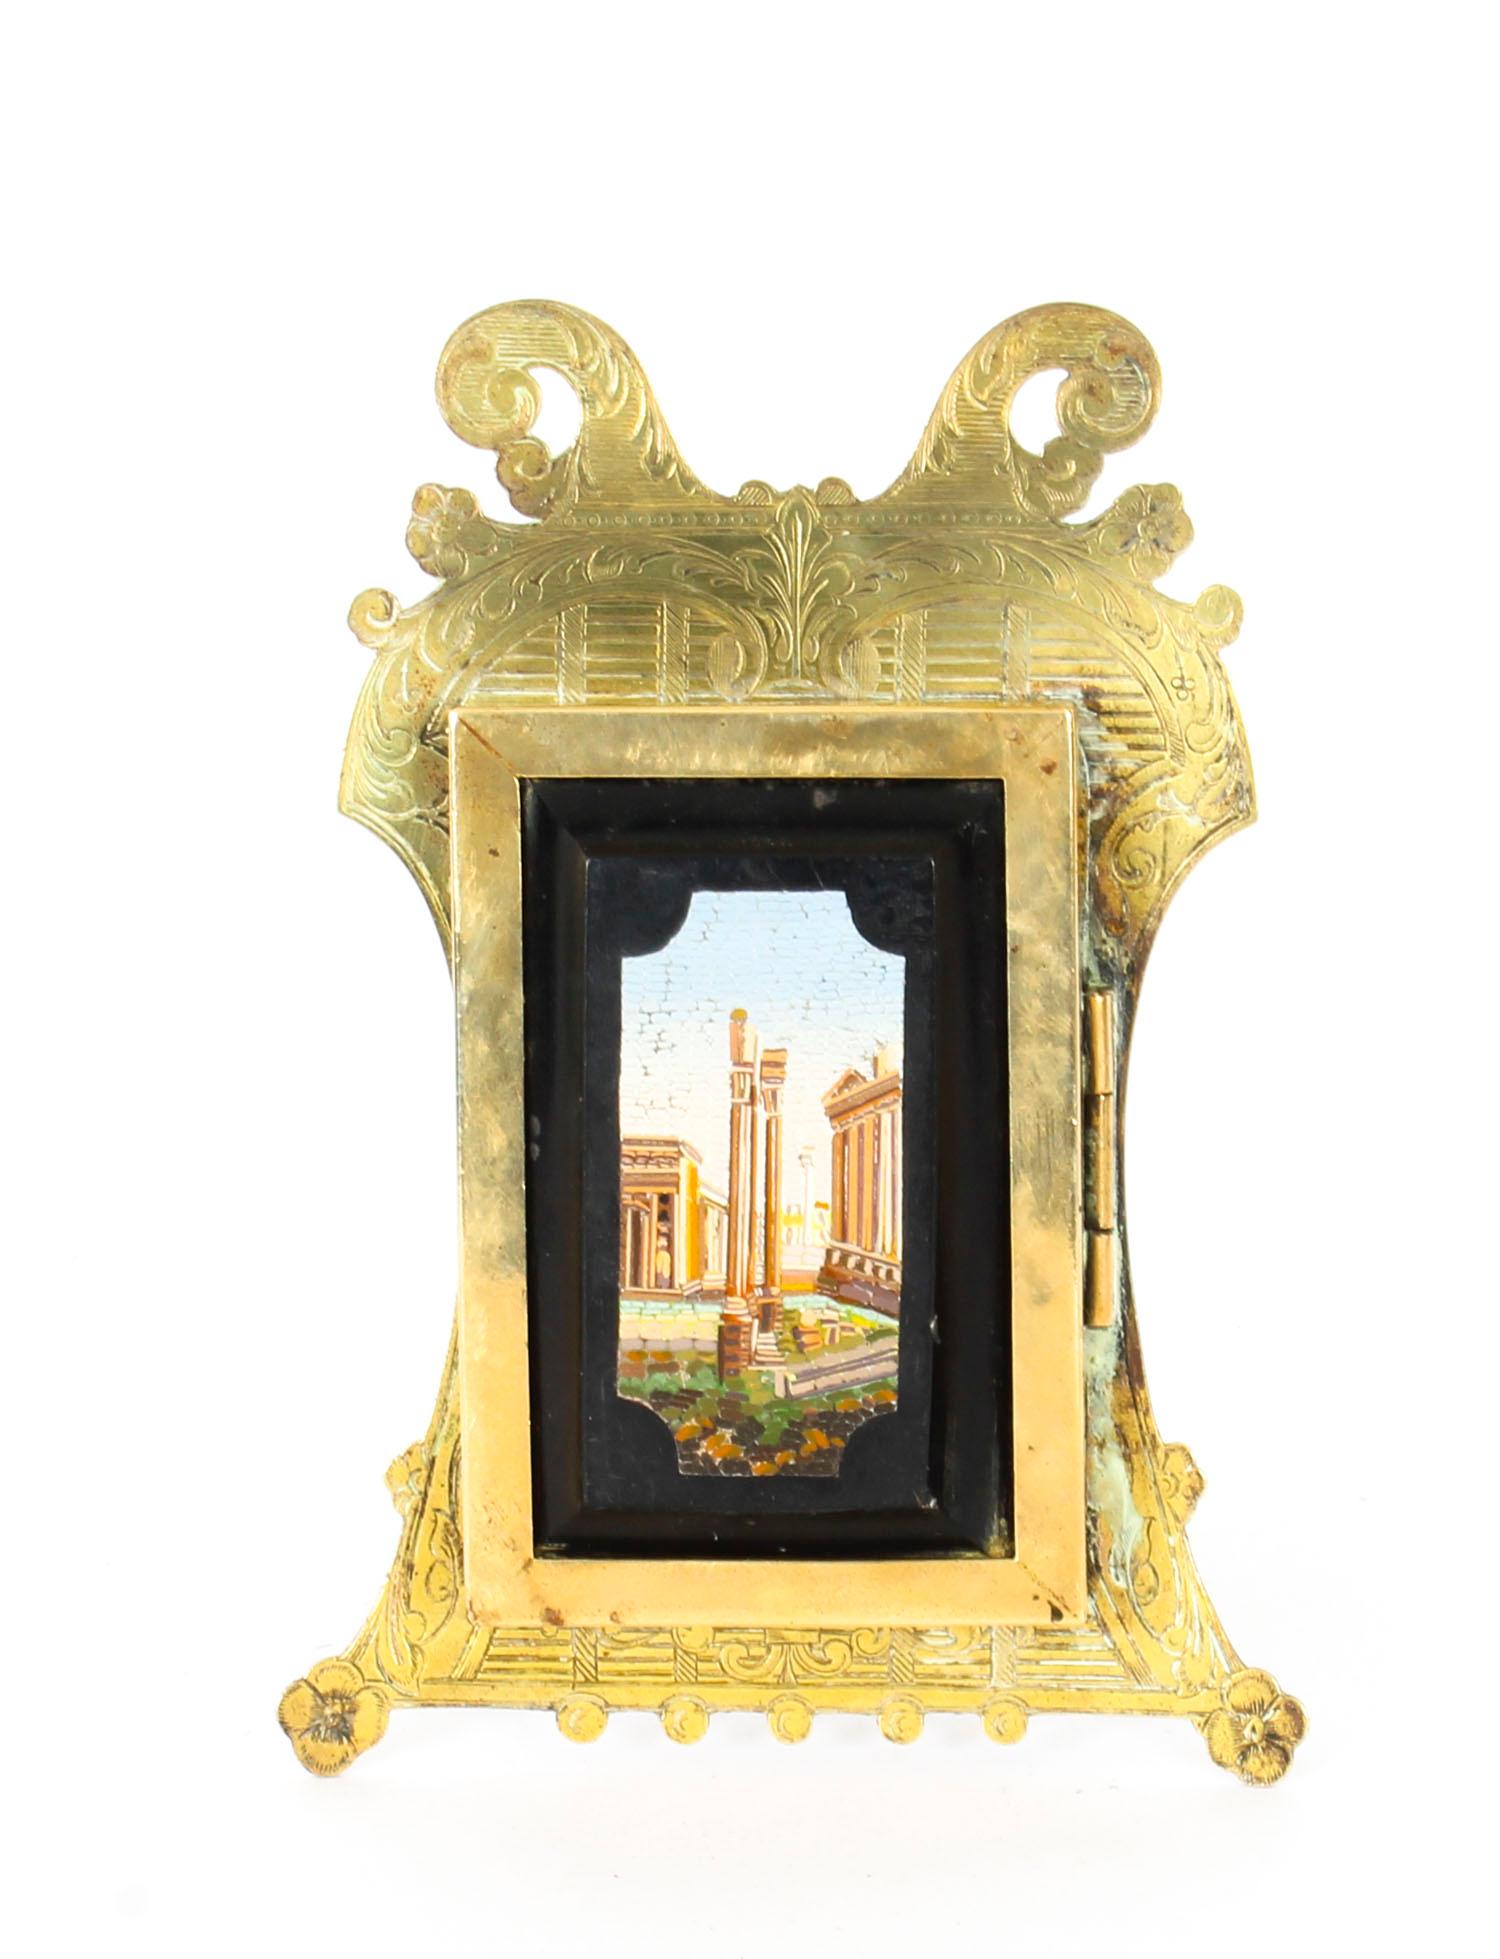 This is a beautiful antique Grand Tour Italian micro mosaic mounted ormolu easel photograph frame, 19th century in date.

The hinged cover decorated with a mesmerizing micro mosaic panel of Roman ruins Rome, with a padded silk back bearing the